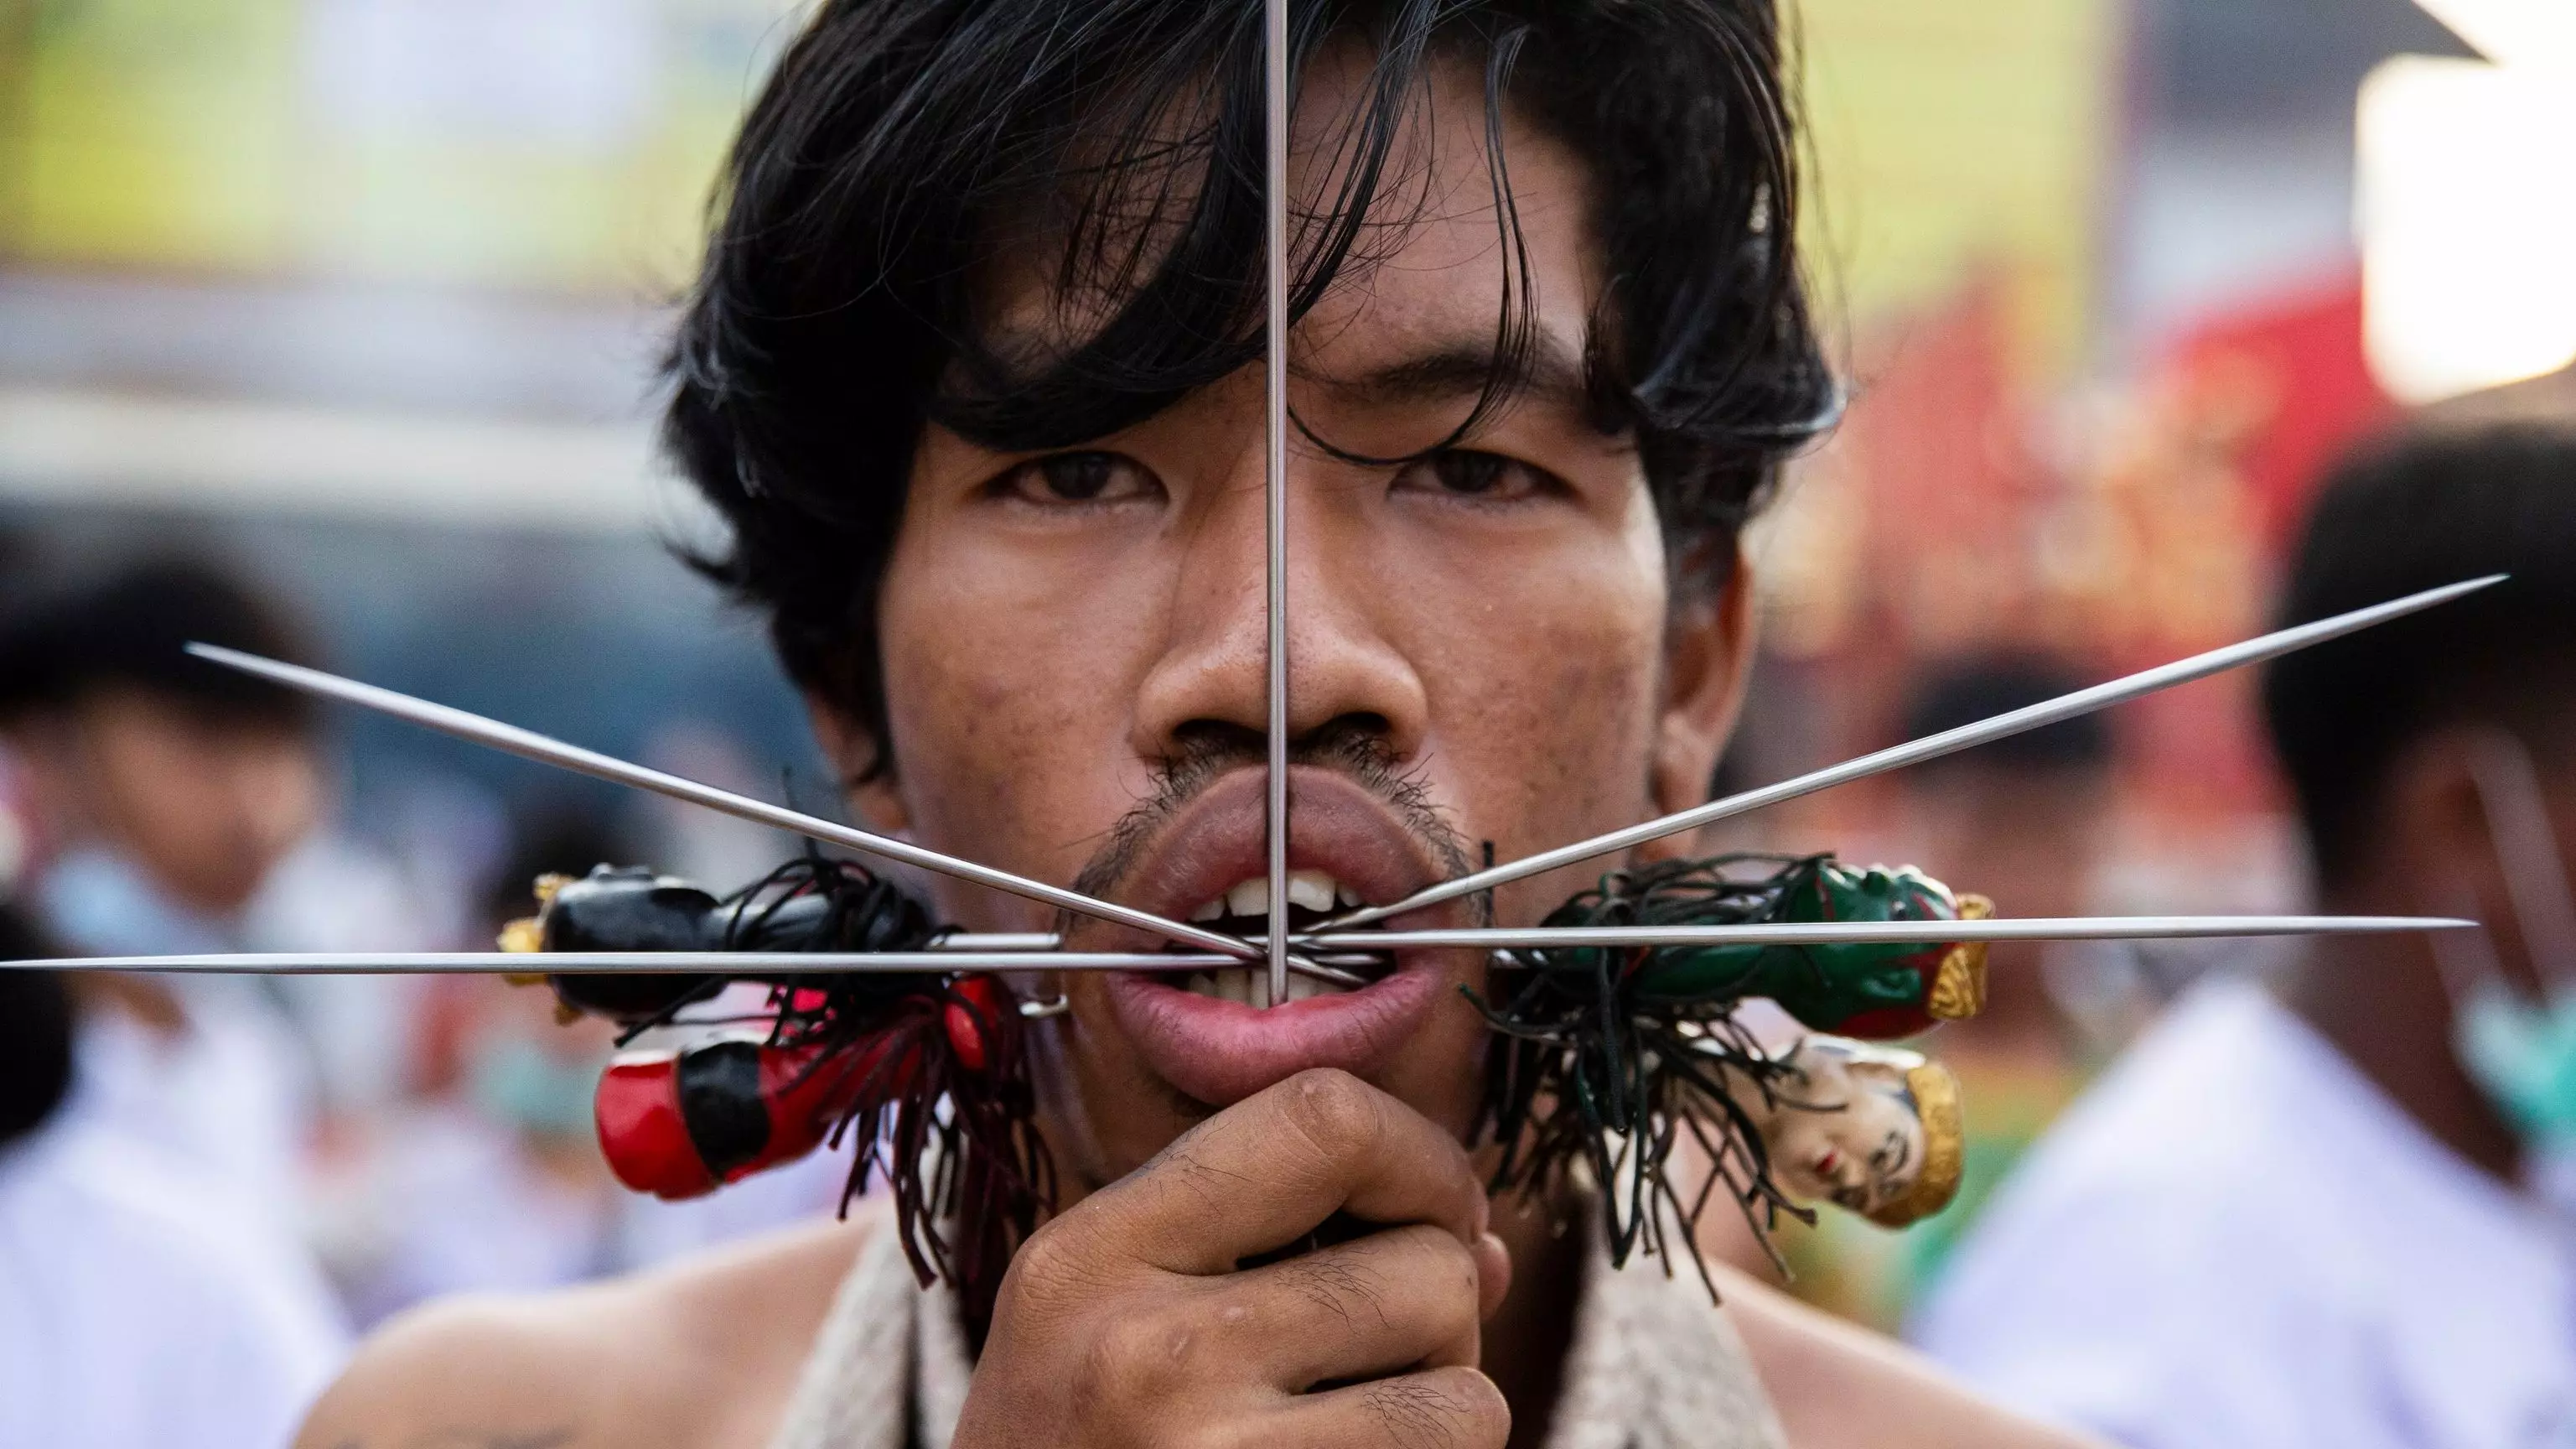 Worshippers Pierce Faces With Metal Spikes And Axes At Thai Vegetarian Festival